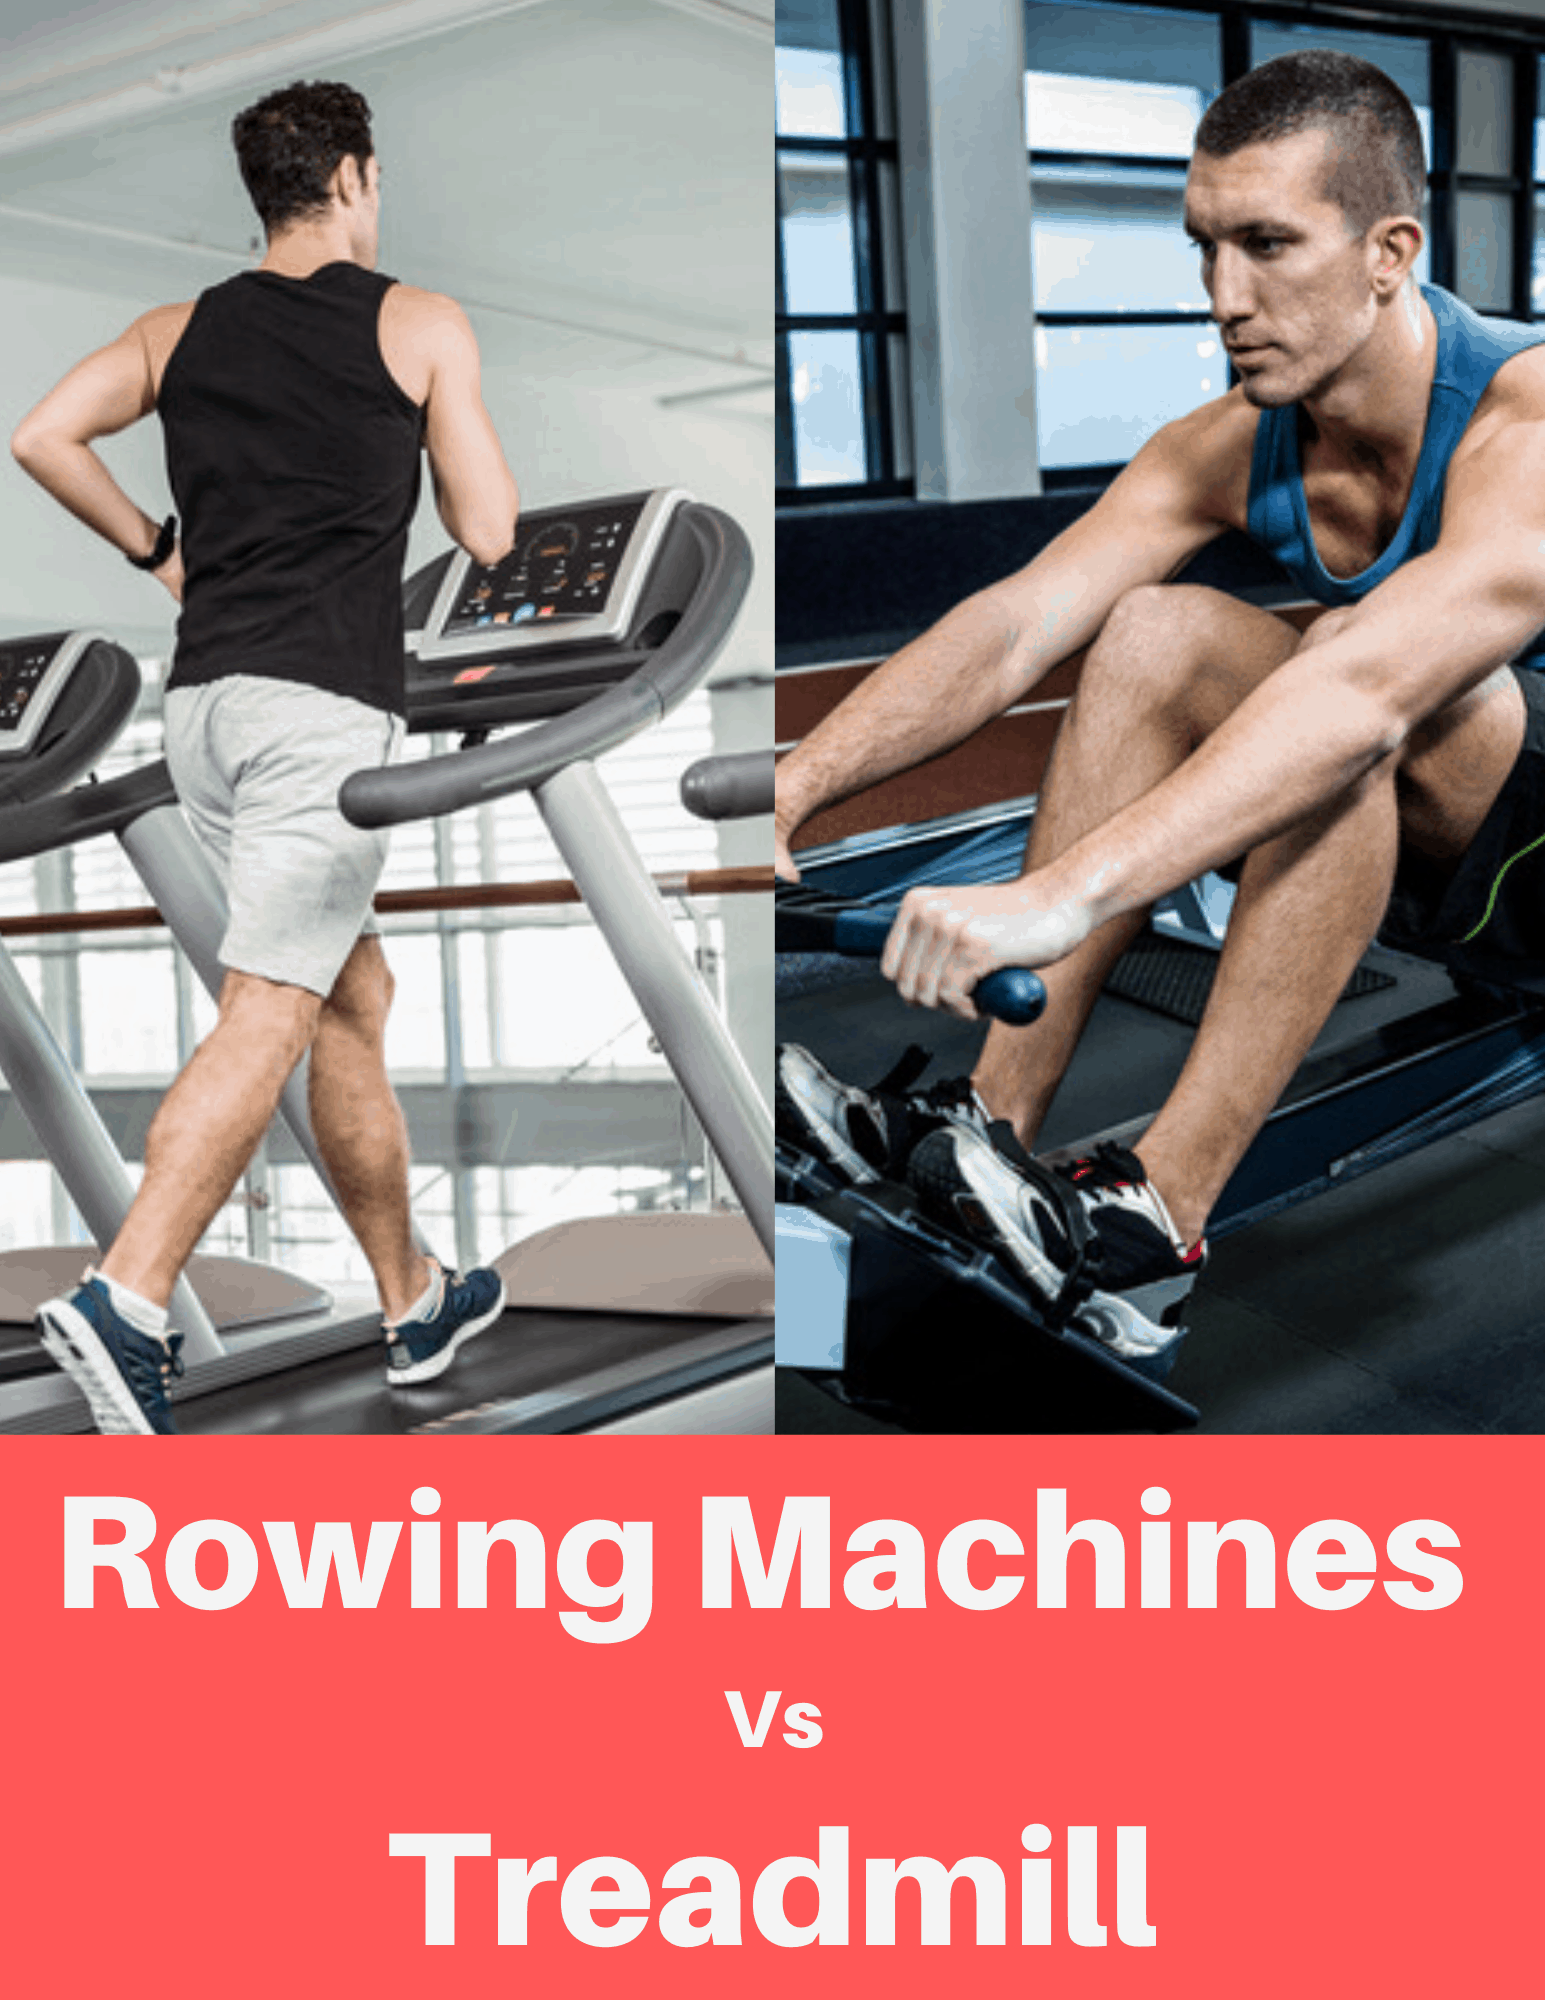 rowing machines vs treadmill for weight loss